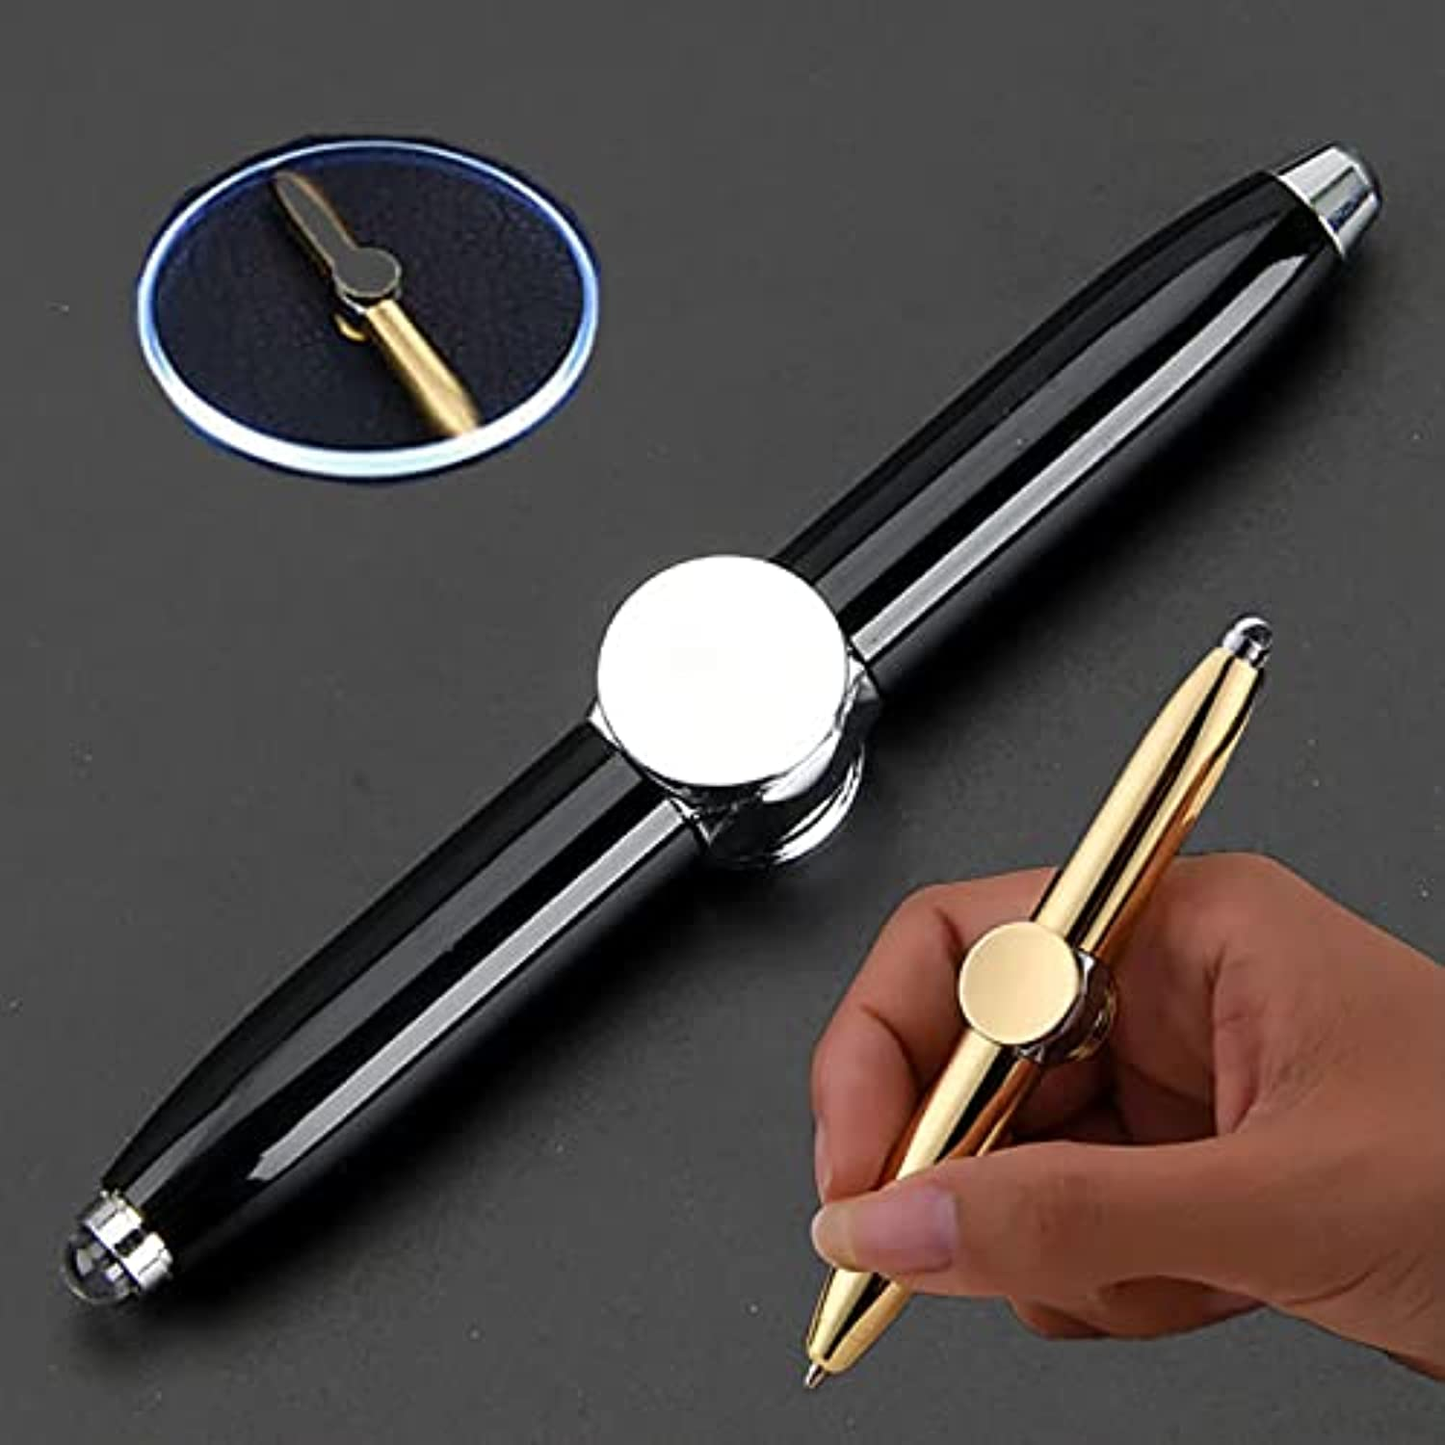 Spinning Gyro Pen with LED Light to Help ADHD Stress Reducer (Black)